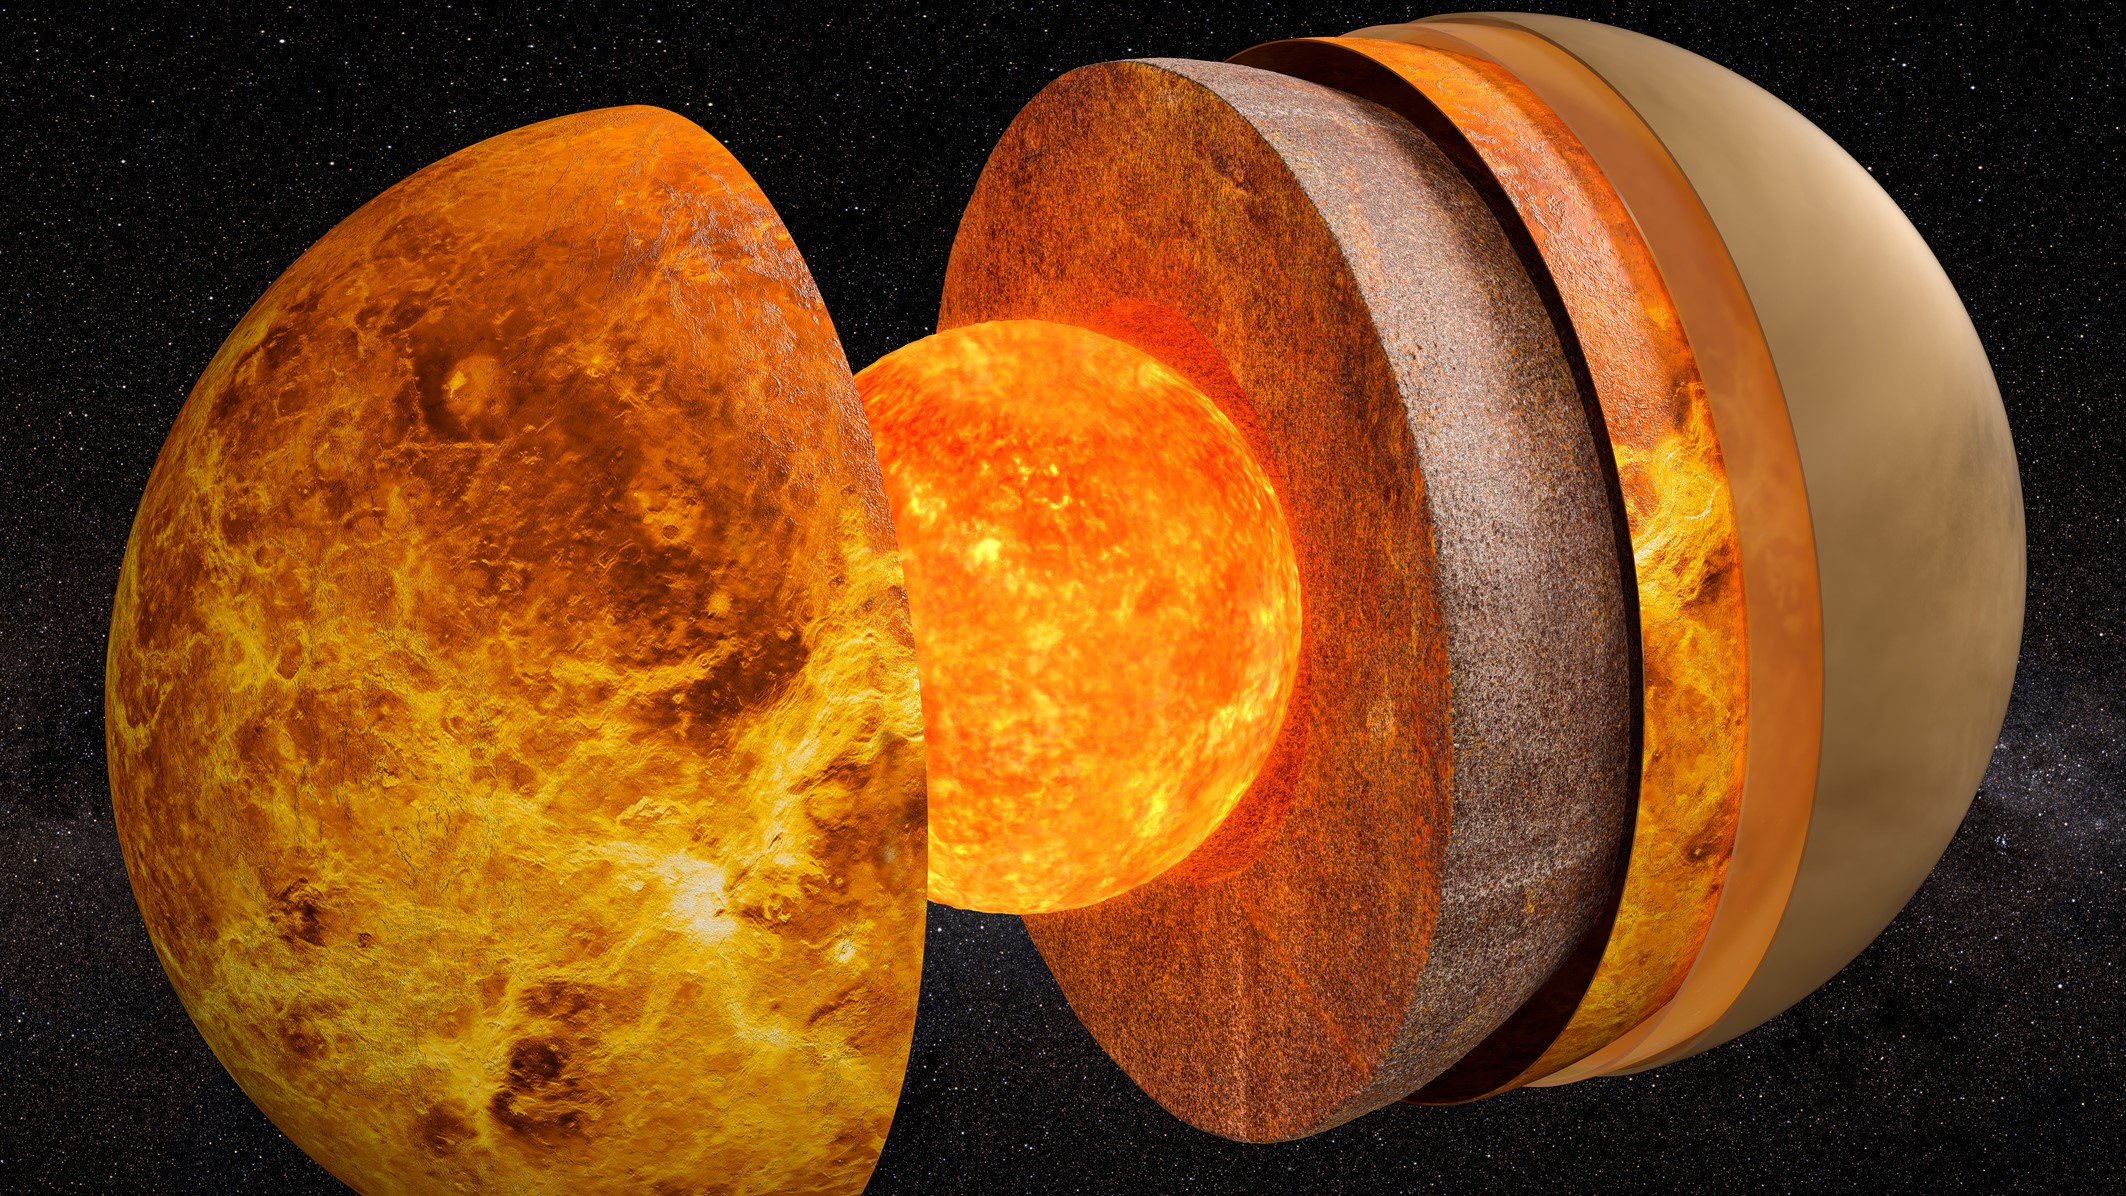 Artist's illustration showing the internal structure of Venus. The layers of the planet are peeled back to reveal the internal structure of the hot, hellish planet.